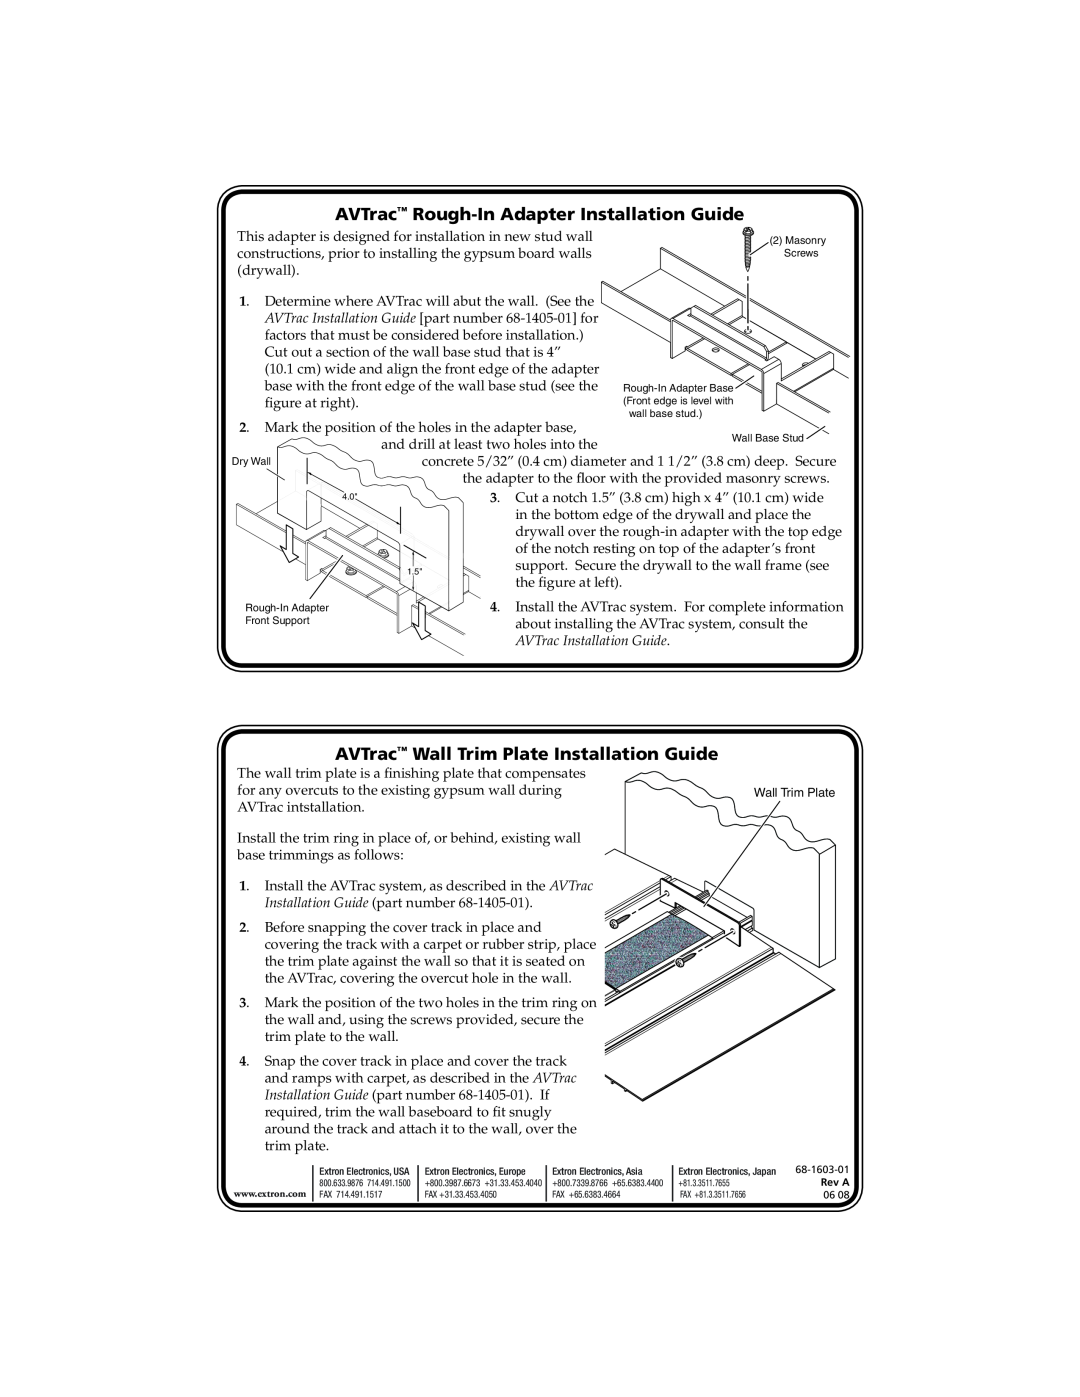 Extron electronic 68-1405-01 manual AVTrac Rough-In Adapter Installation Guide, AVTrac Wall Trim Plate Installation Guide 